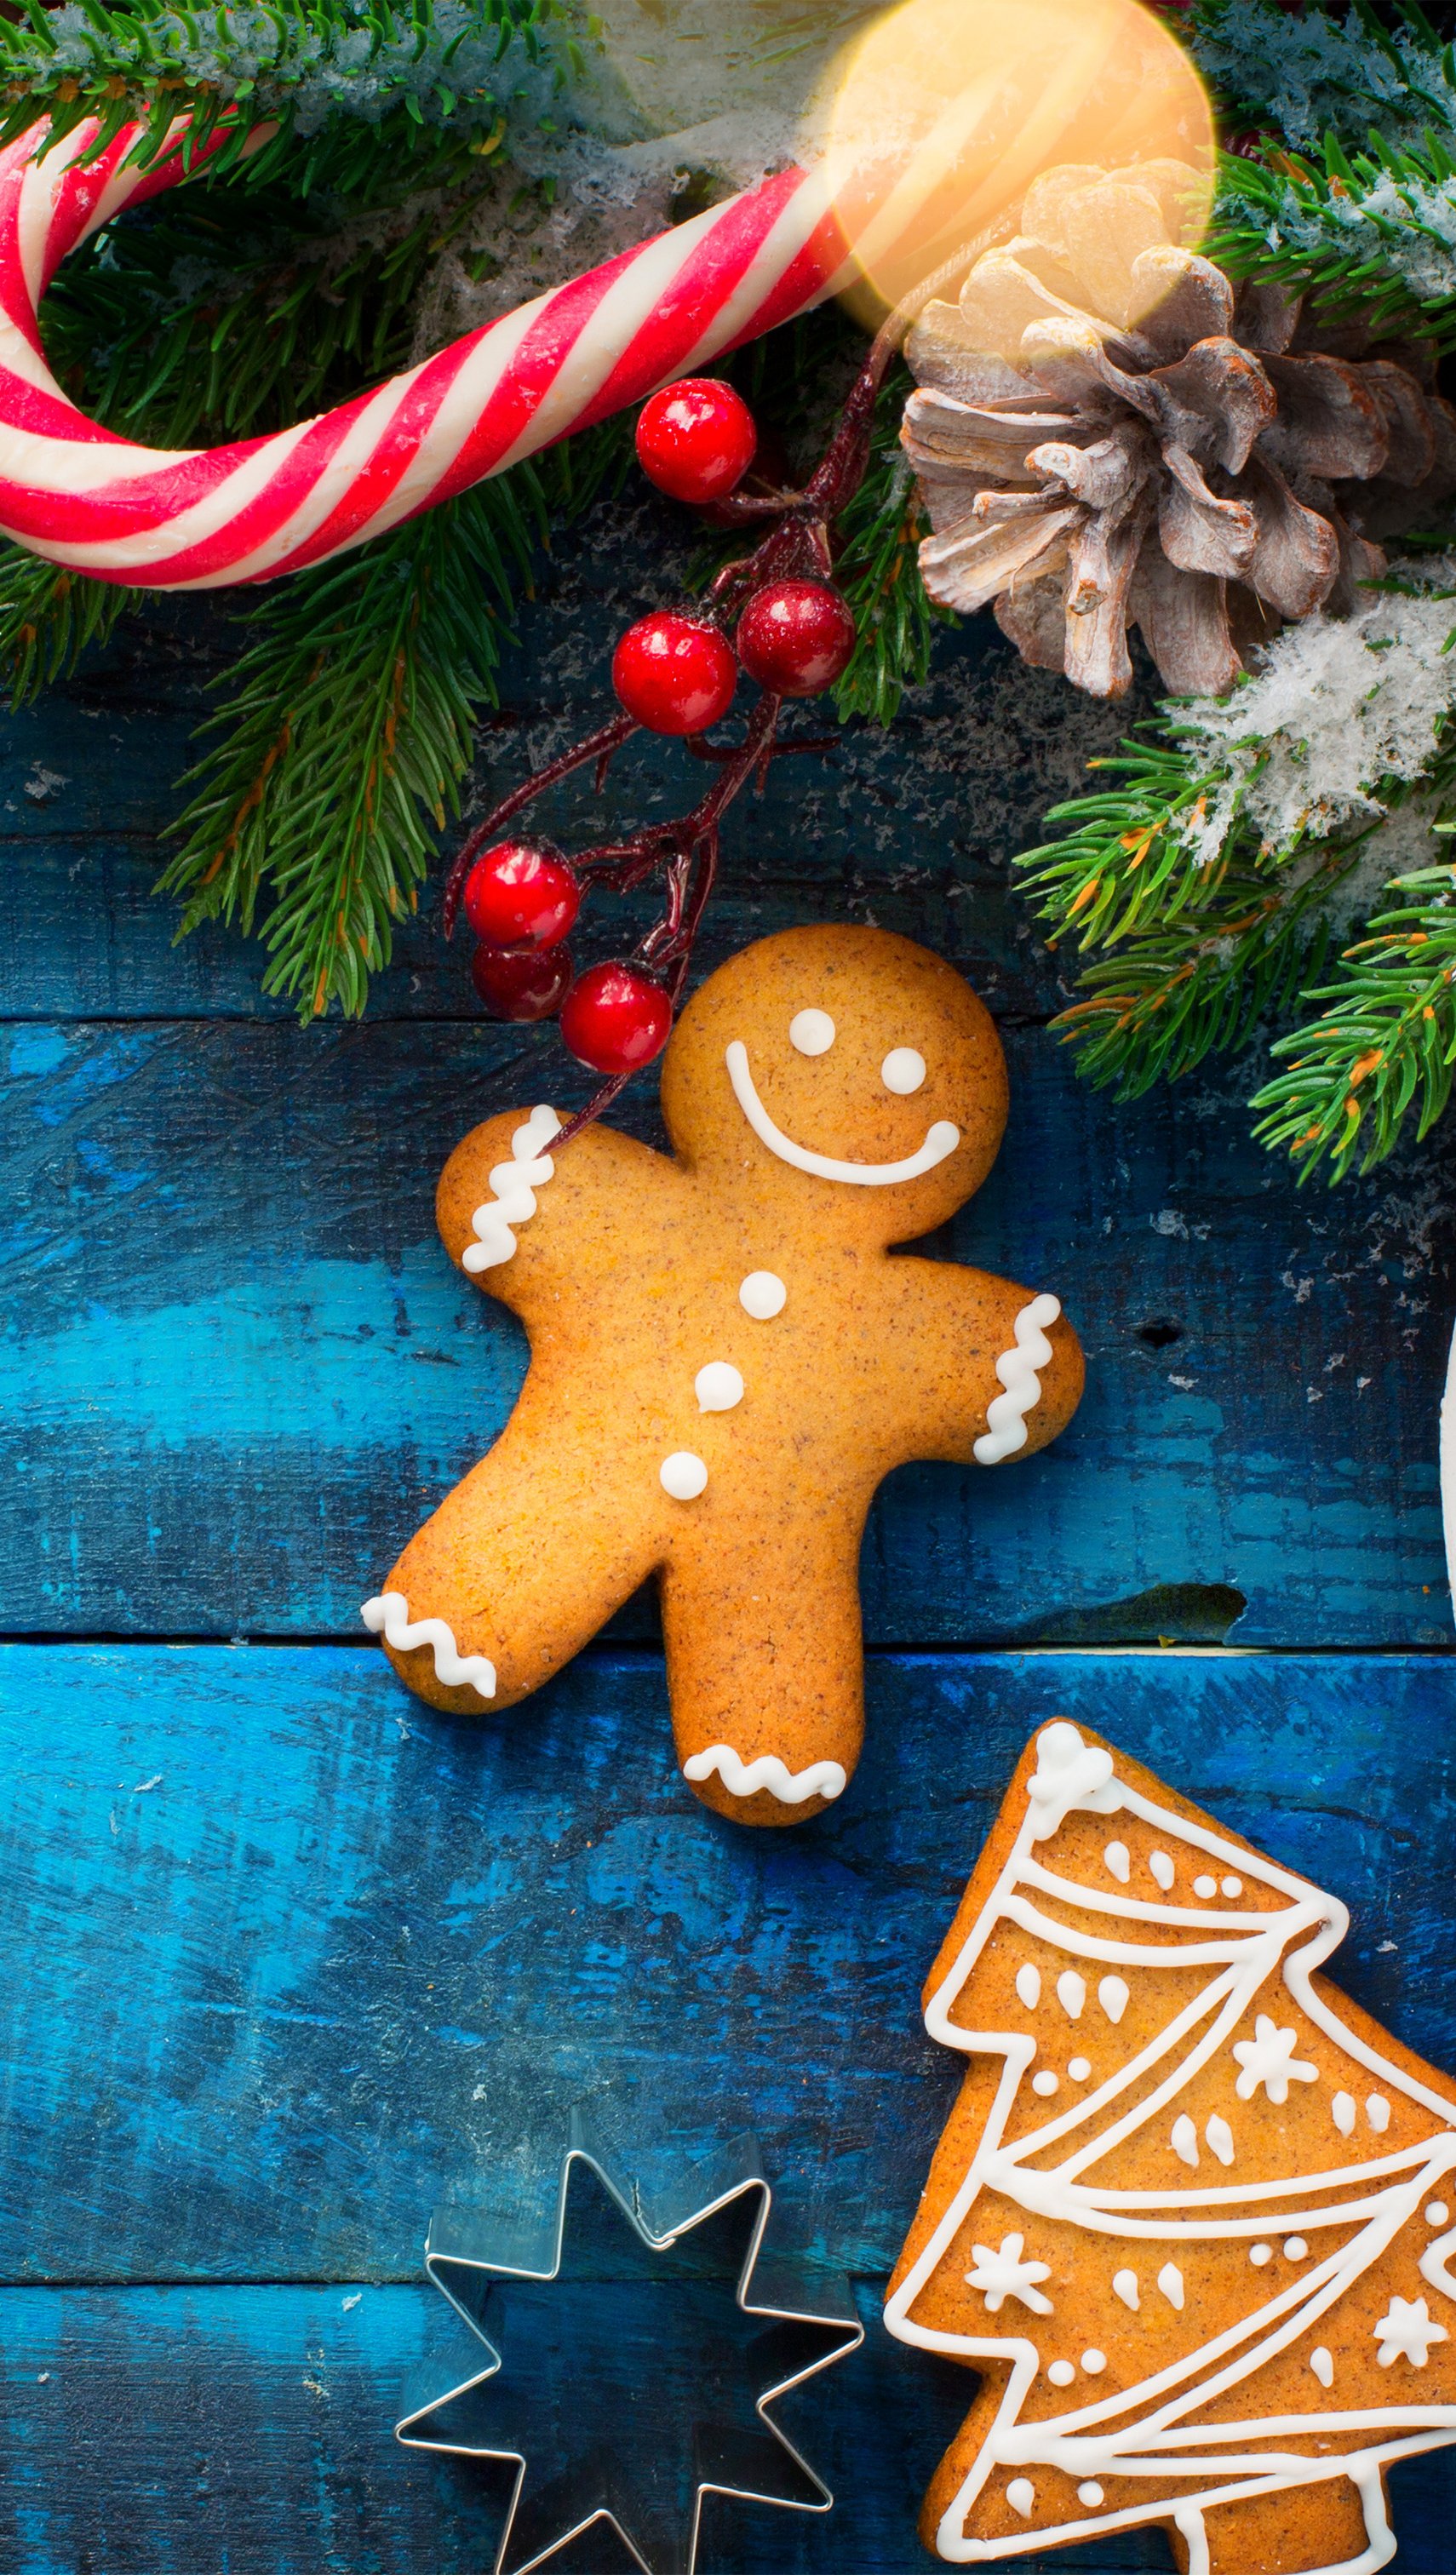 Ginger bread cookies with ornaments Wallpaper ID:6601